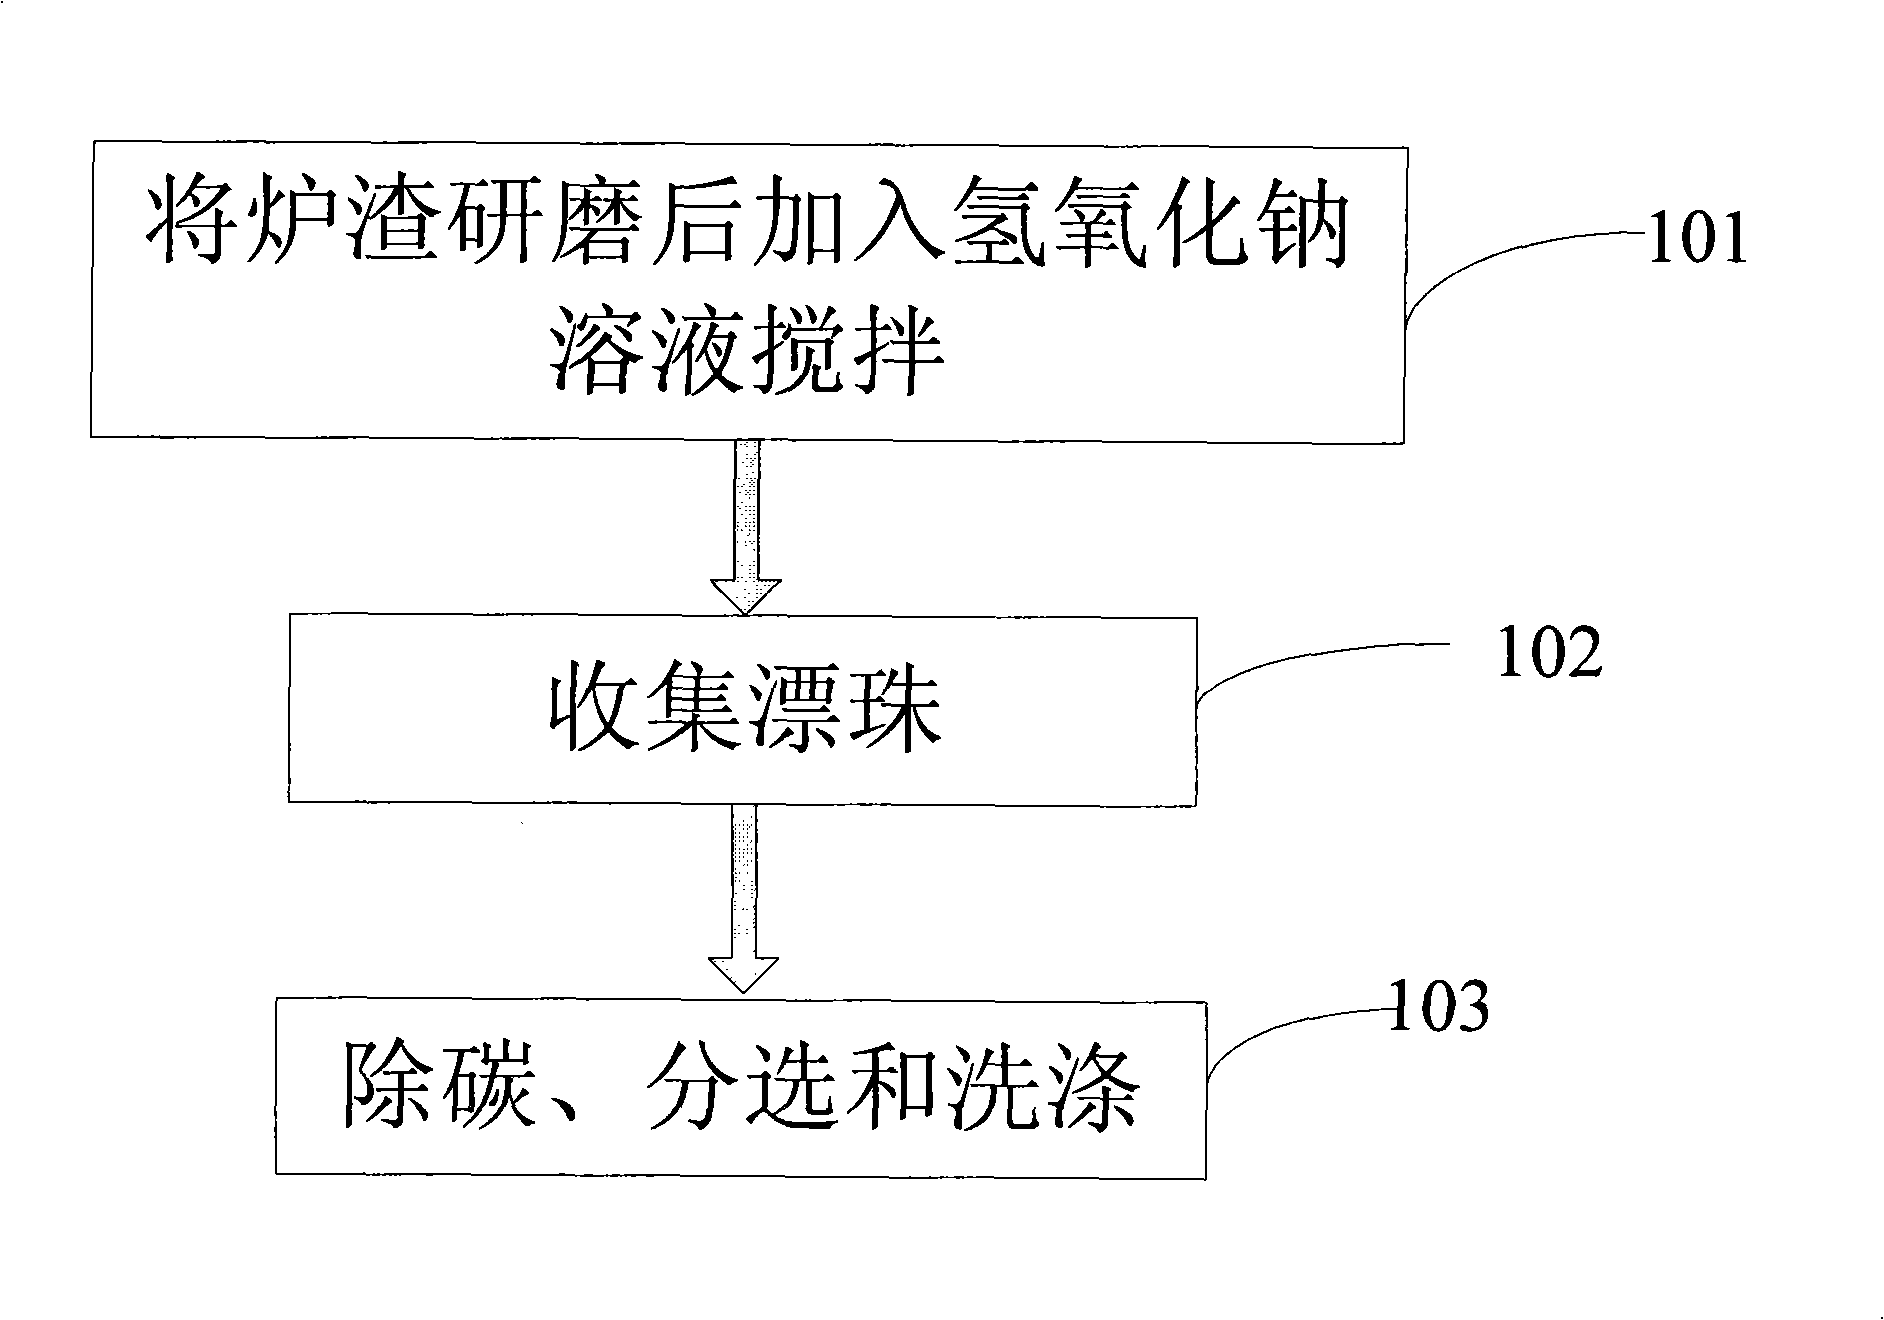 Process for abstracting floating air ball from fly ash or slag